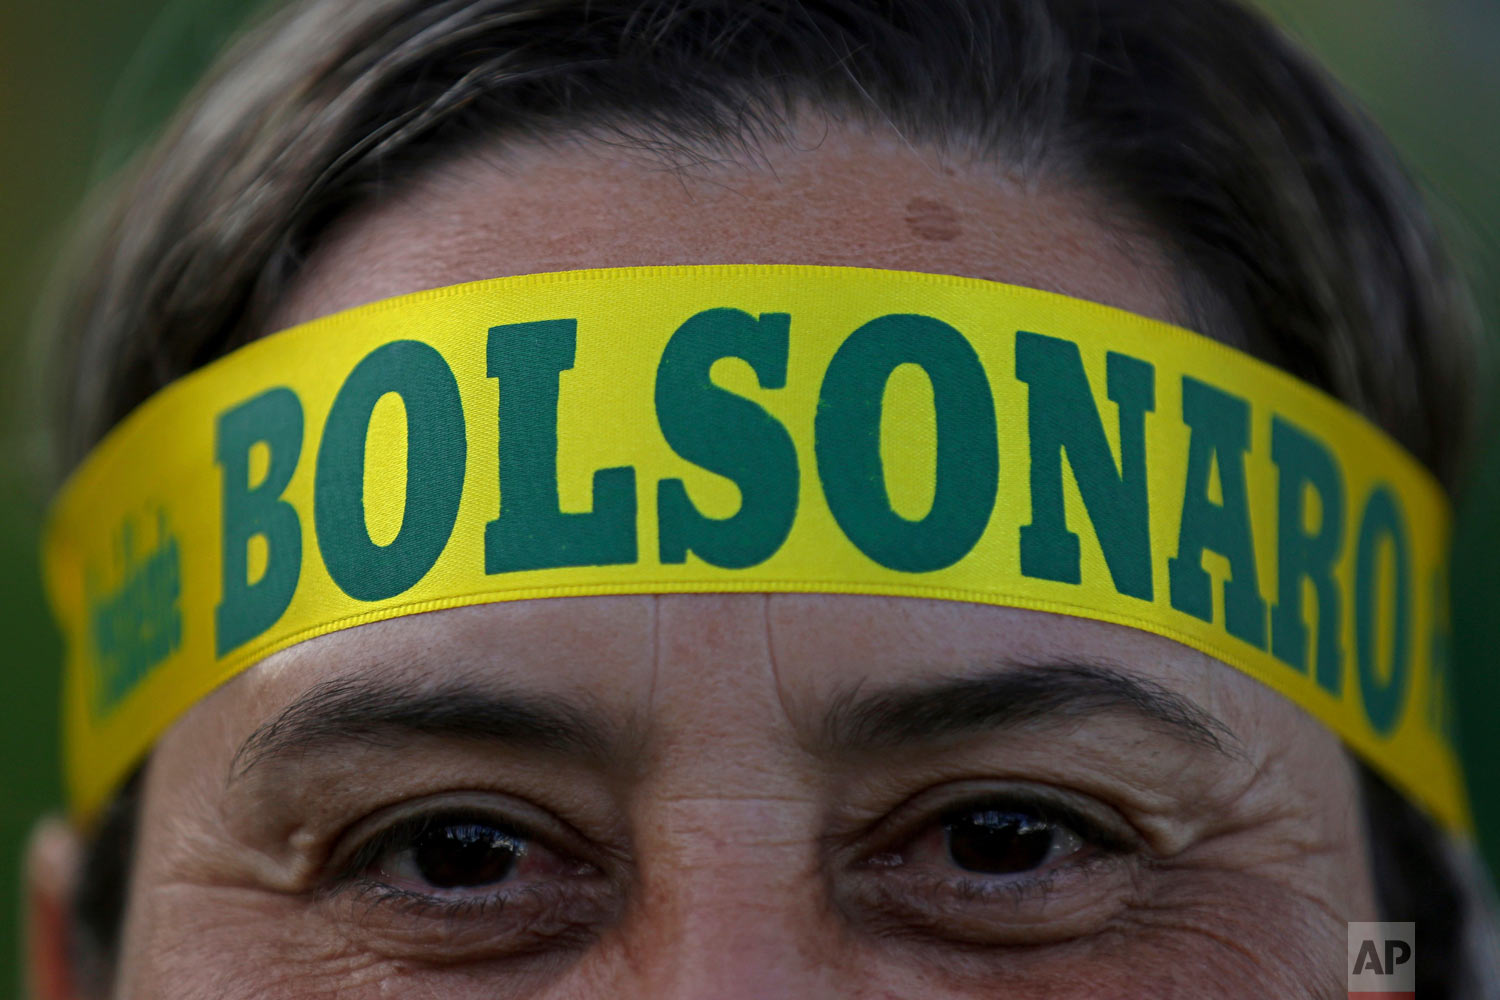  A supporter of presidential front-runner Jair Bolsonaro wears a headband supporting his candidate as he waits with others for election results outside the National Congress in Brasilia, Brazil, Oct. 28, 2018. Brazilian voters decide who will next le